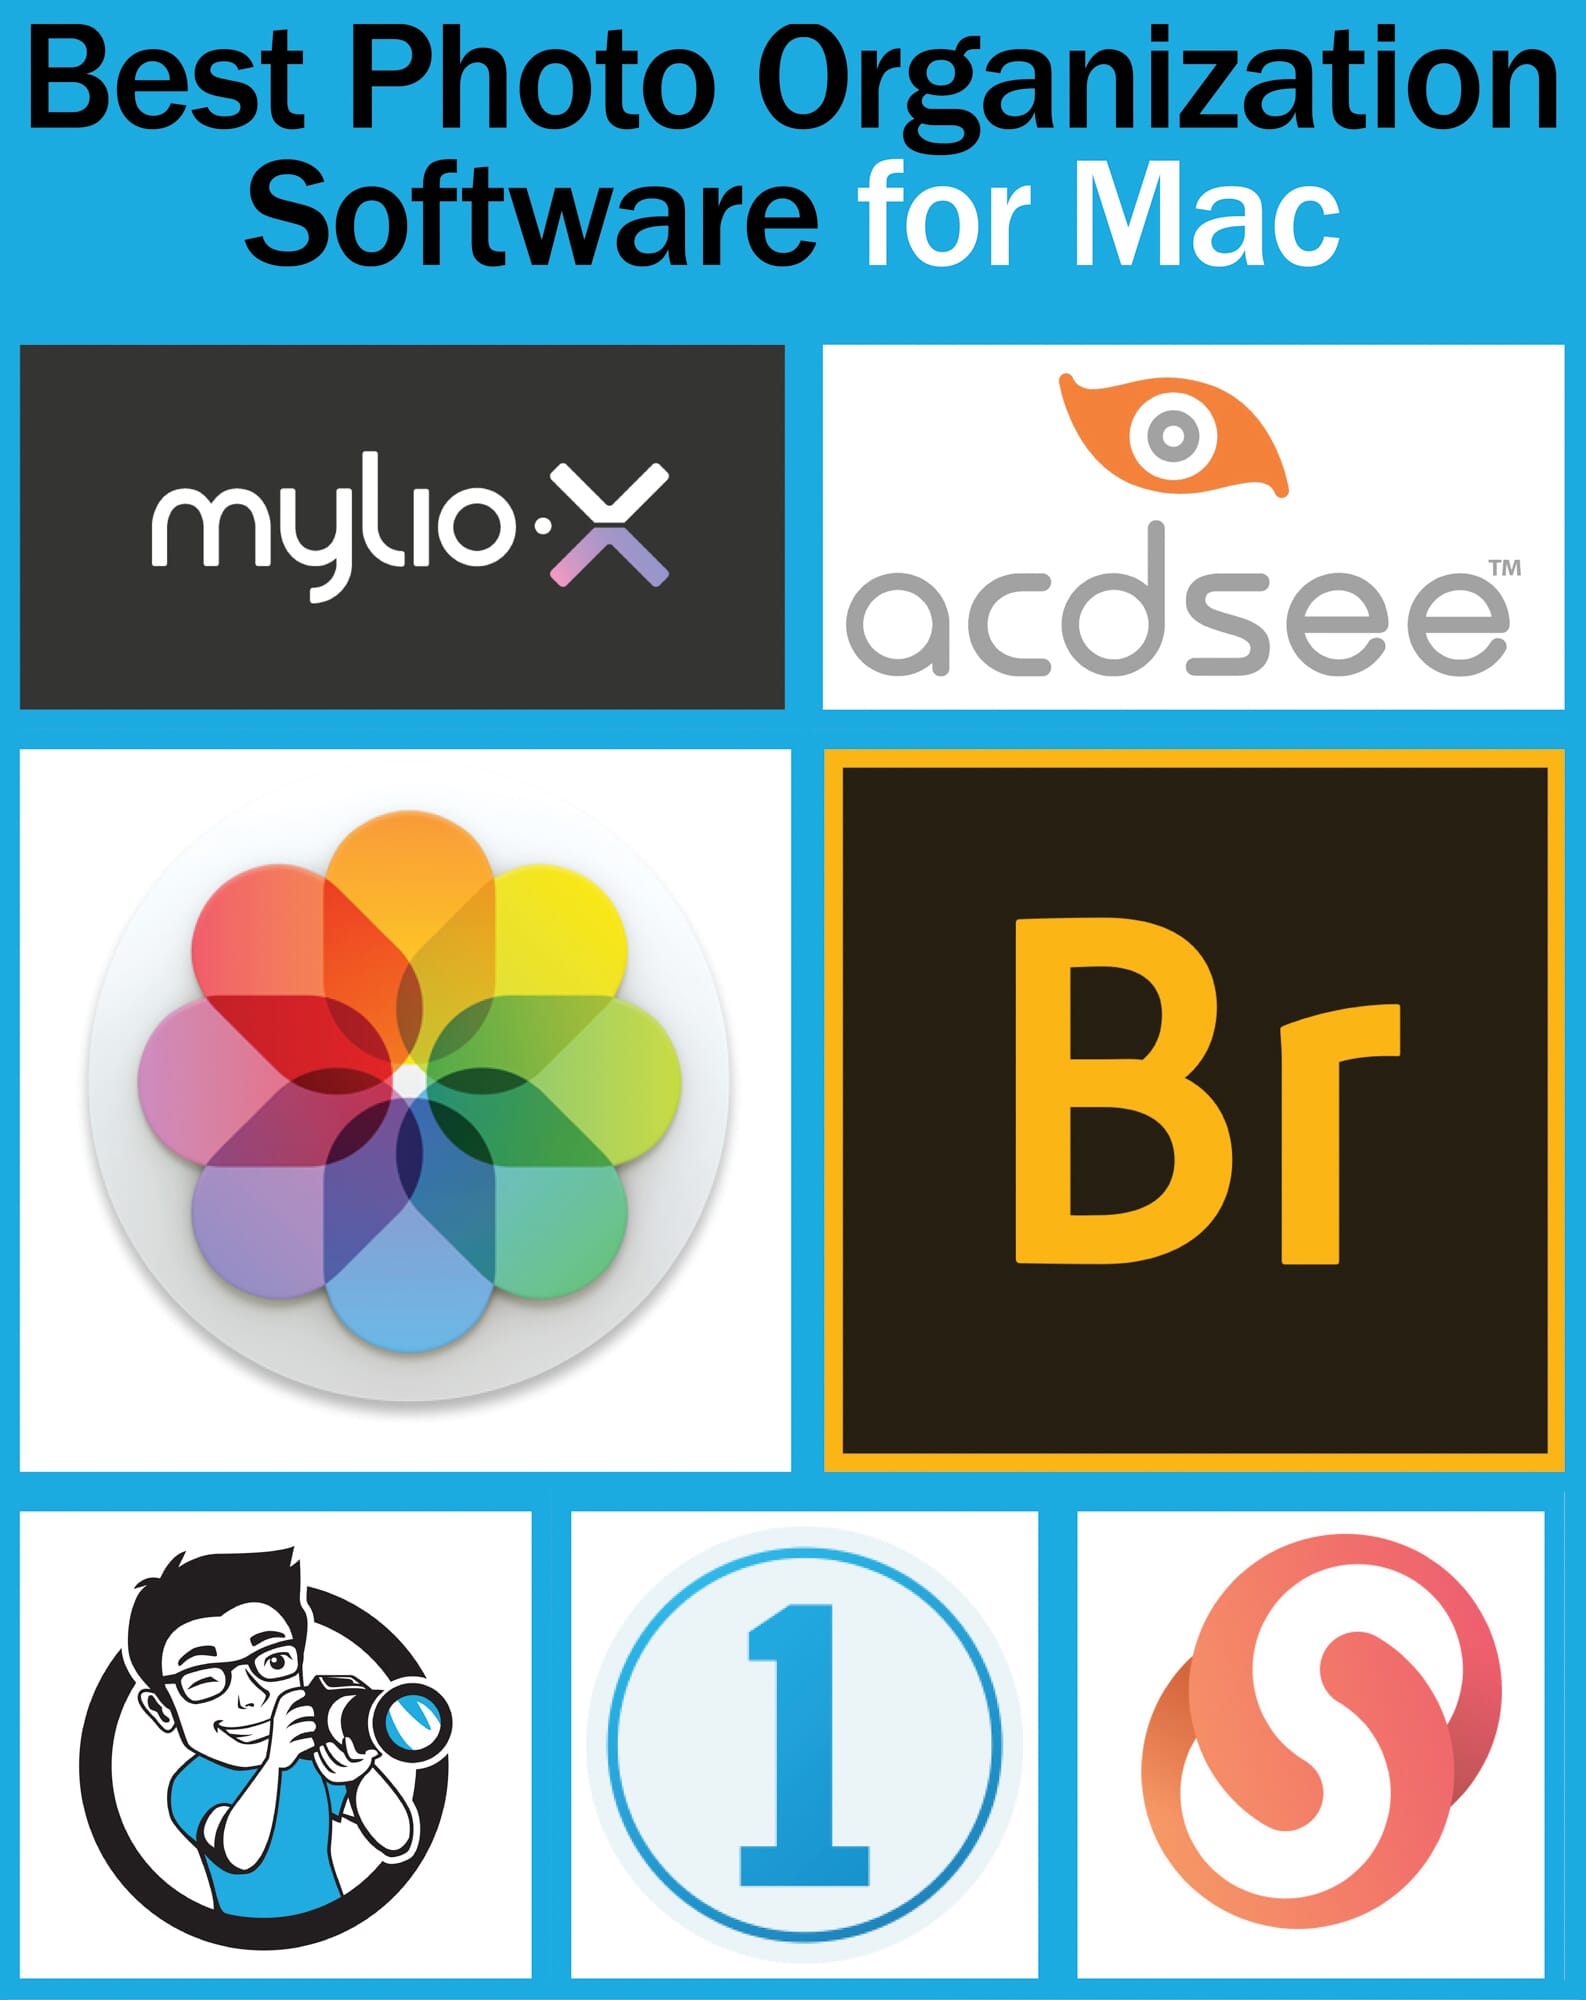 photo recognition software for mac